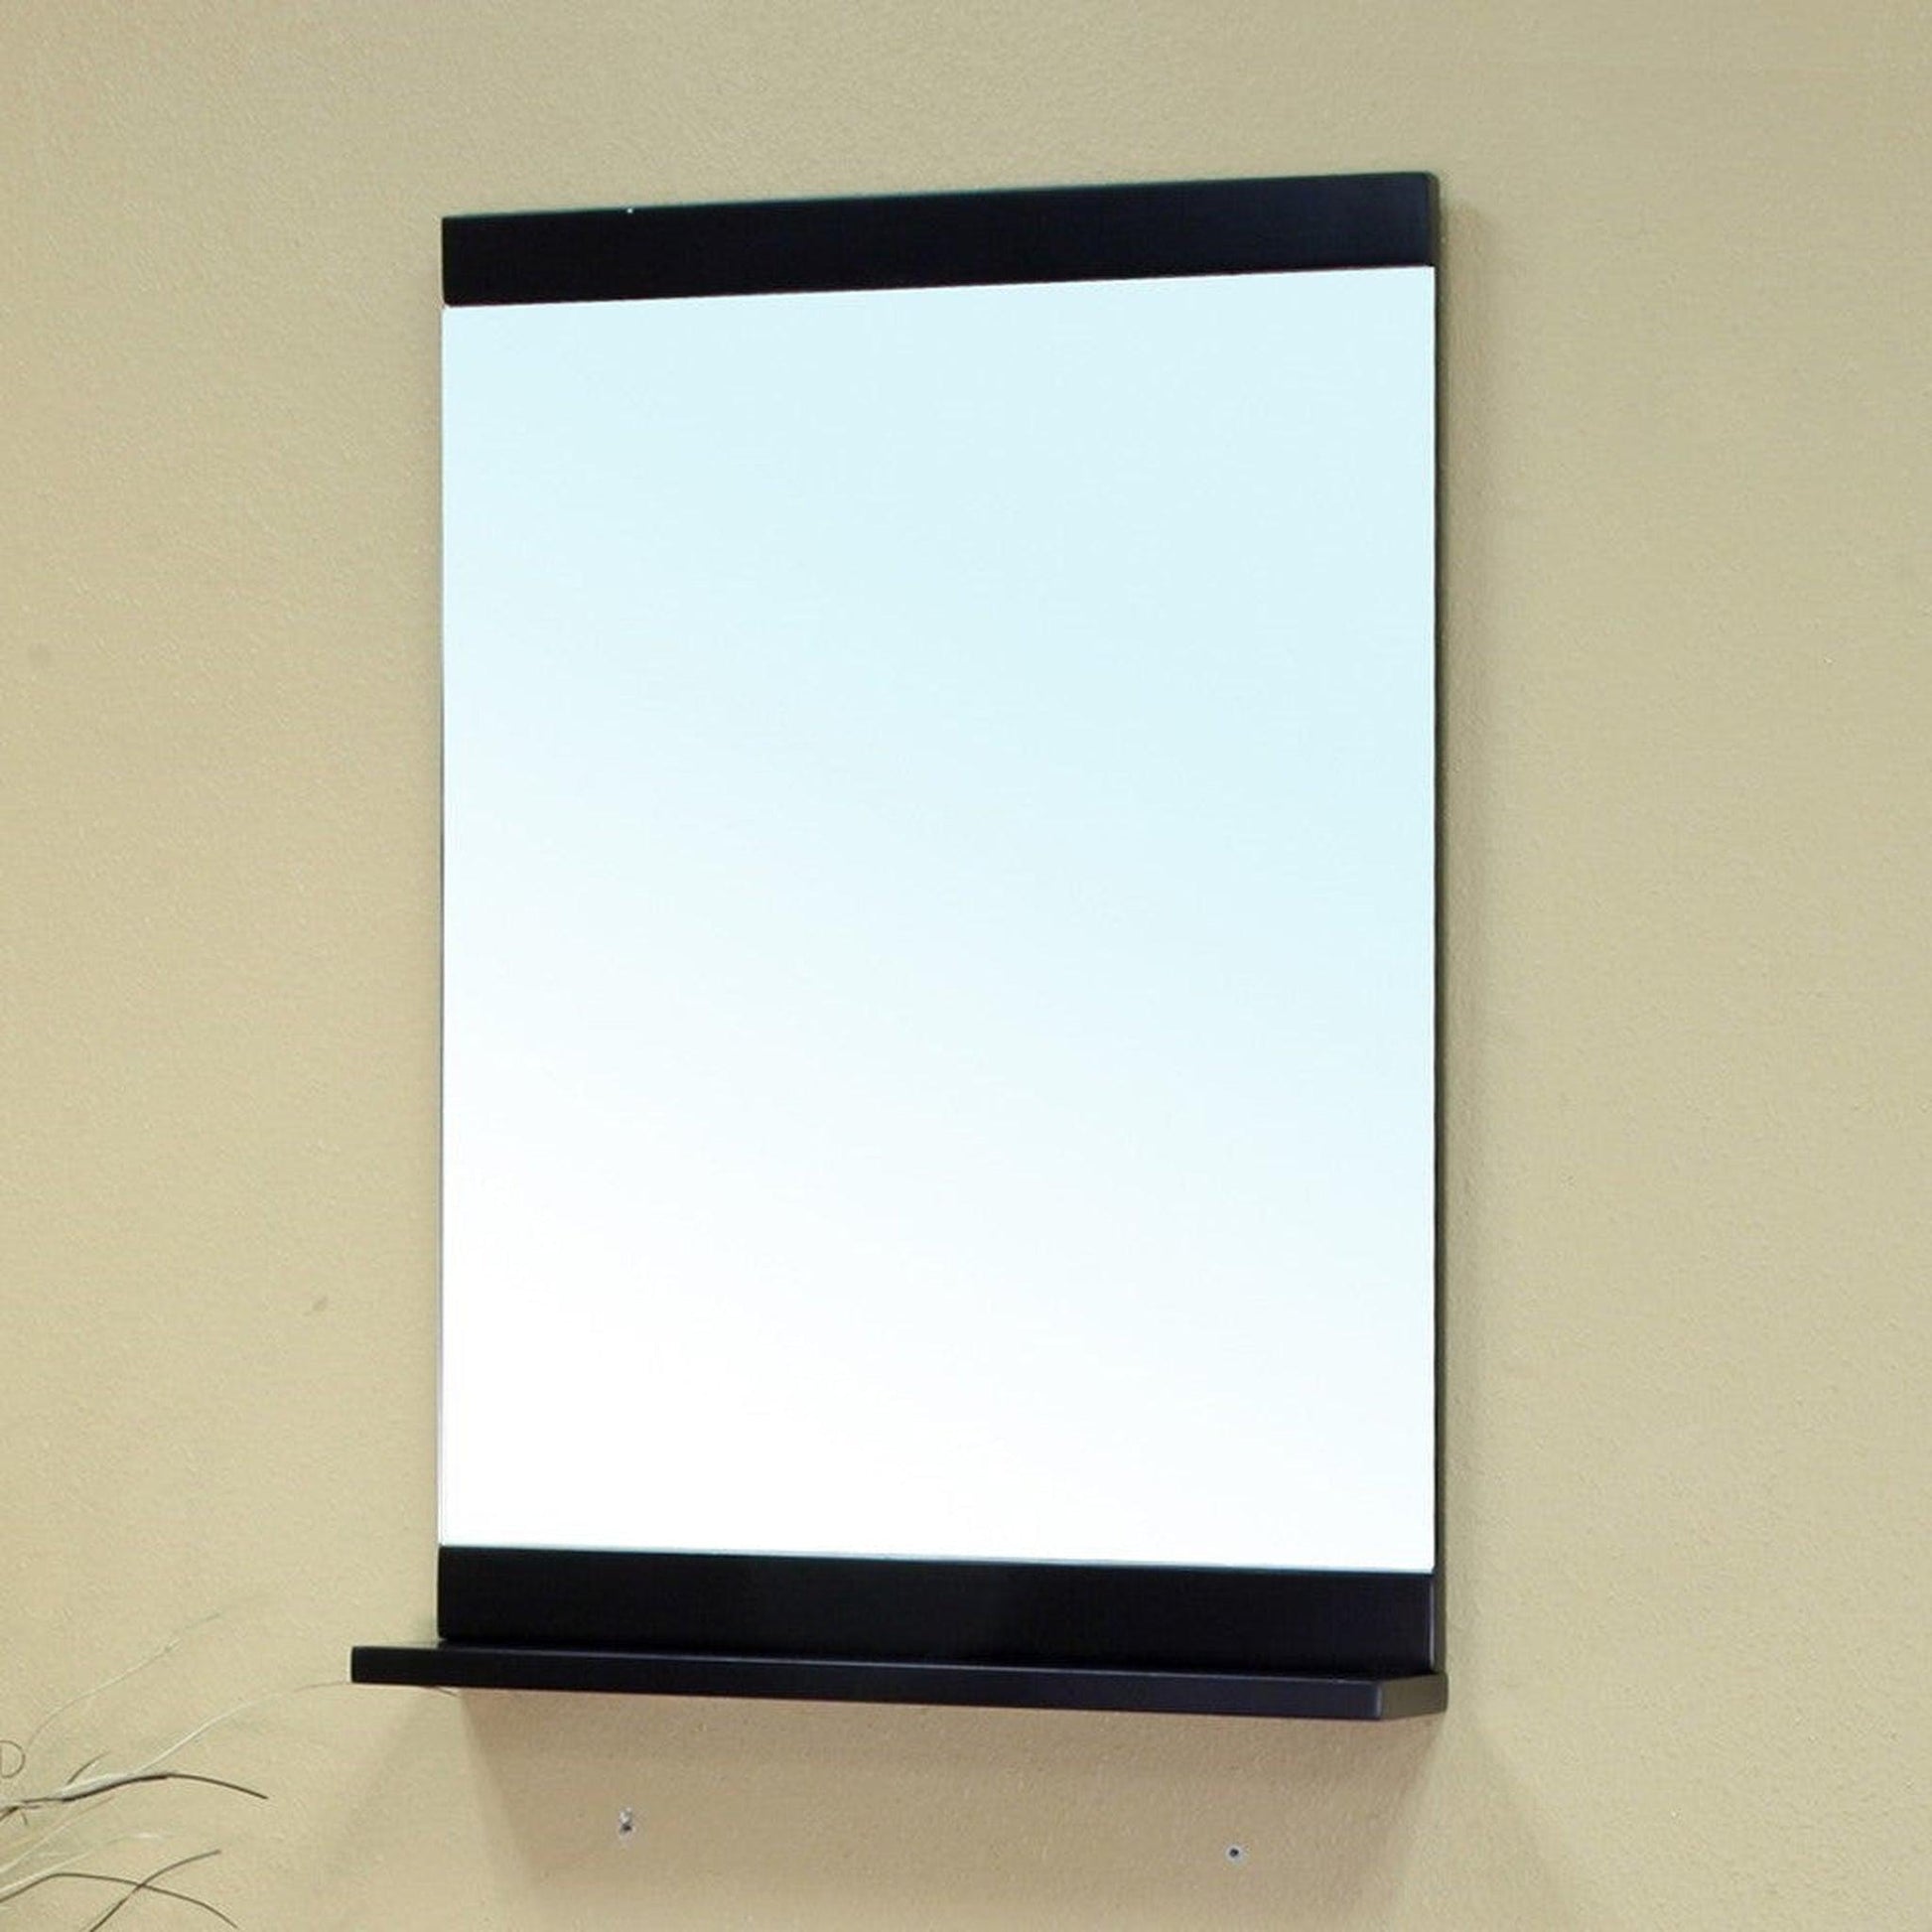 Bellaterra Home 30" x 33" Black Rectangle Wall-Mounted Solid Wood Framed Mirror